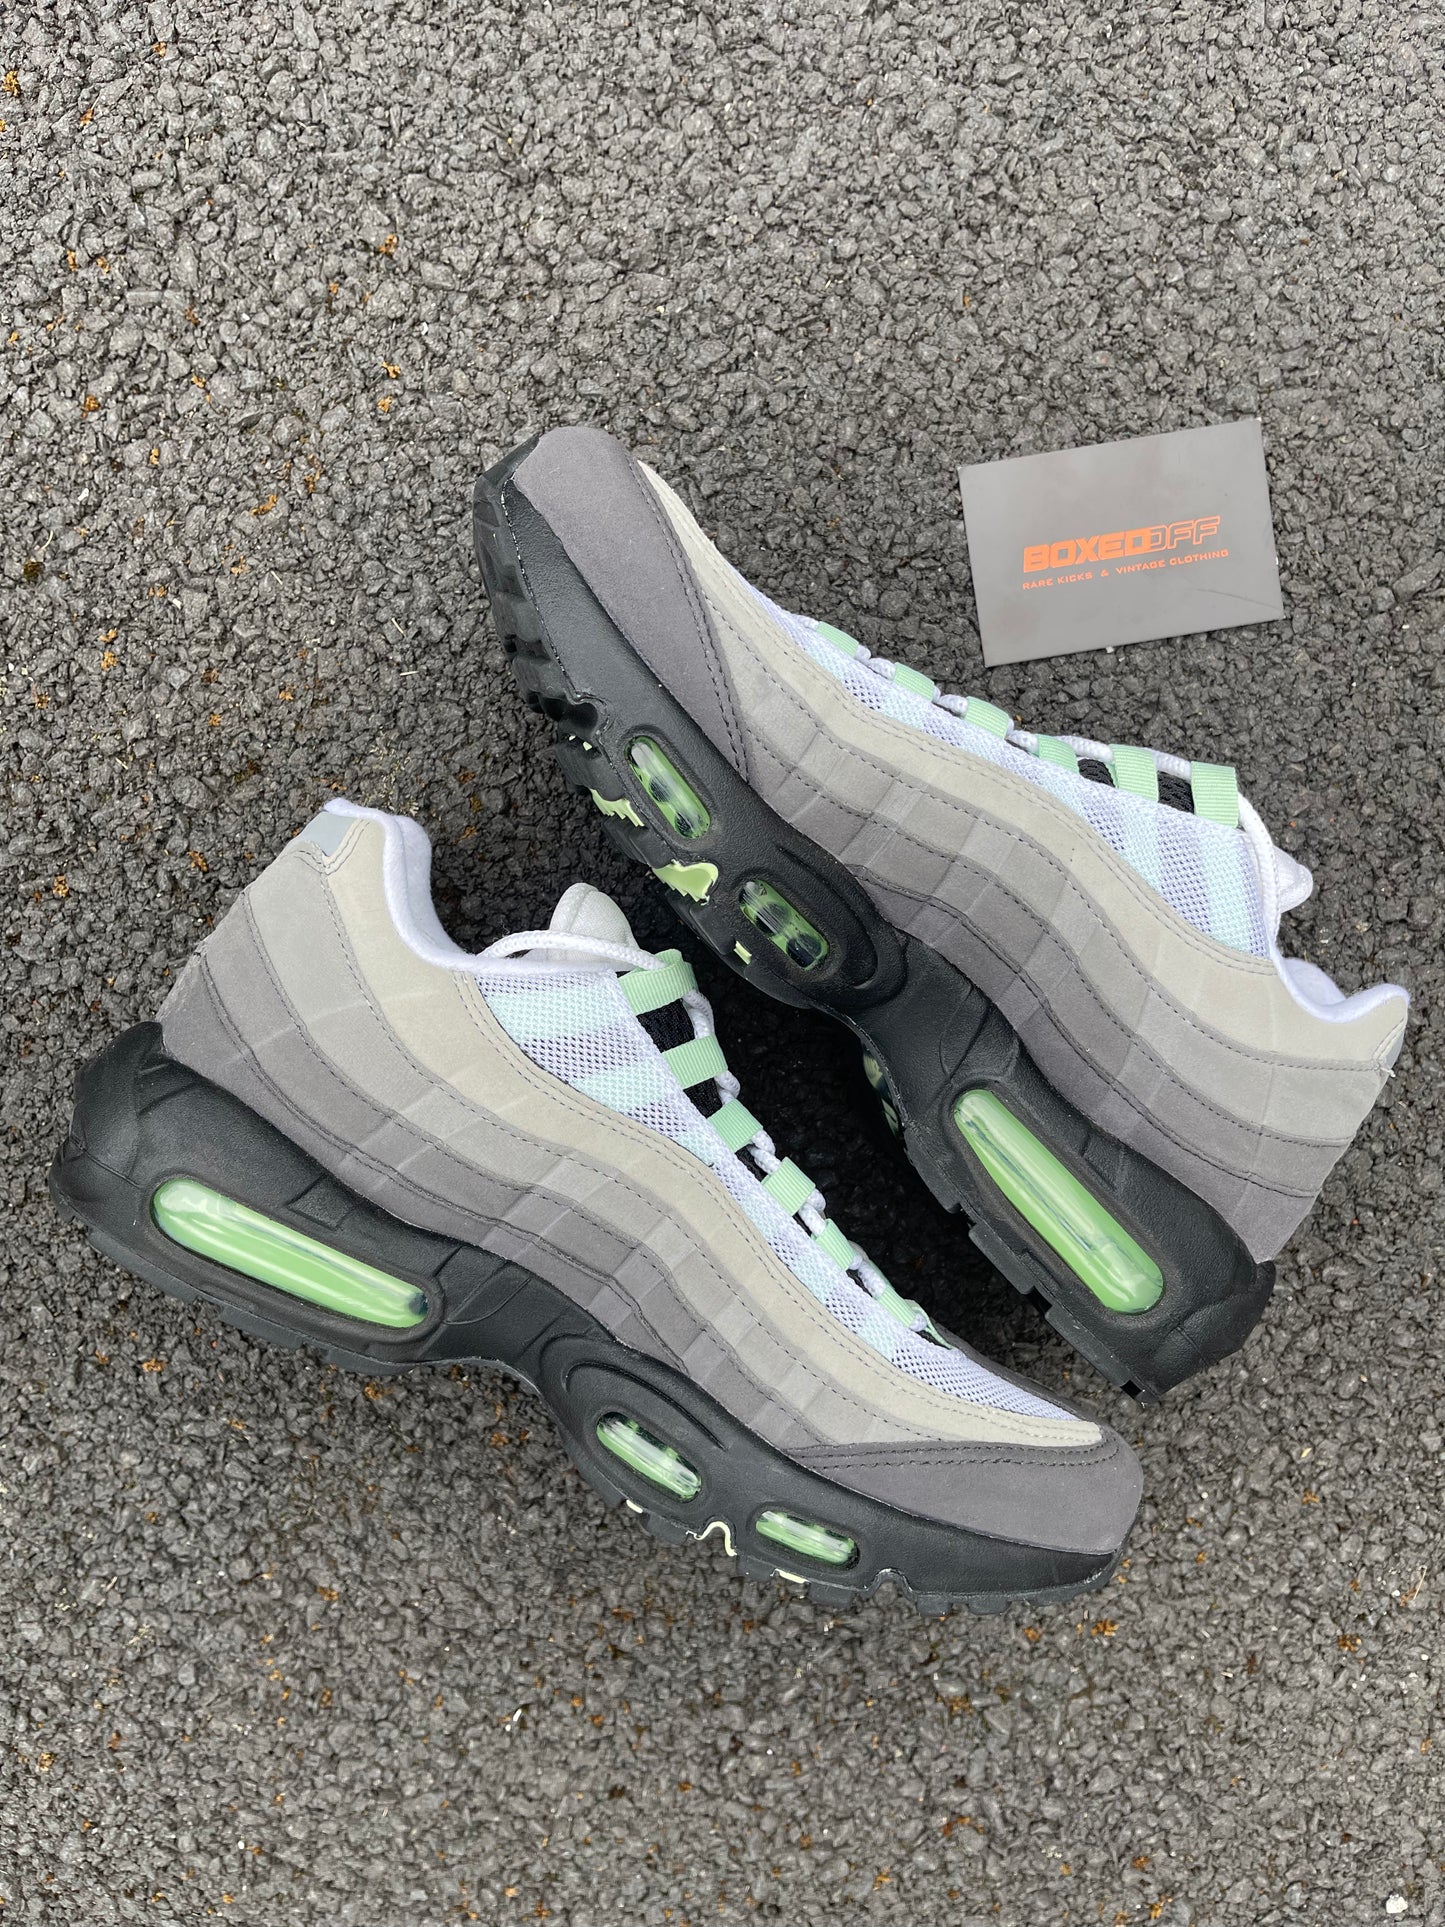 Nike Air Max 95 OG Fresh Mint - UK 7 | Pre Loved Collection